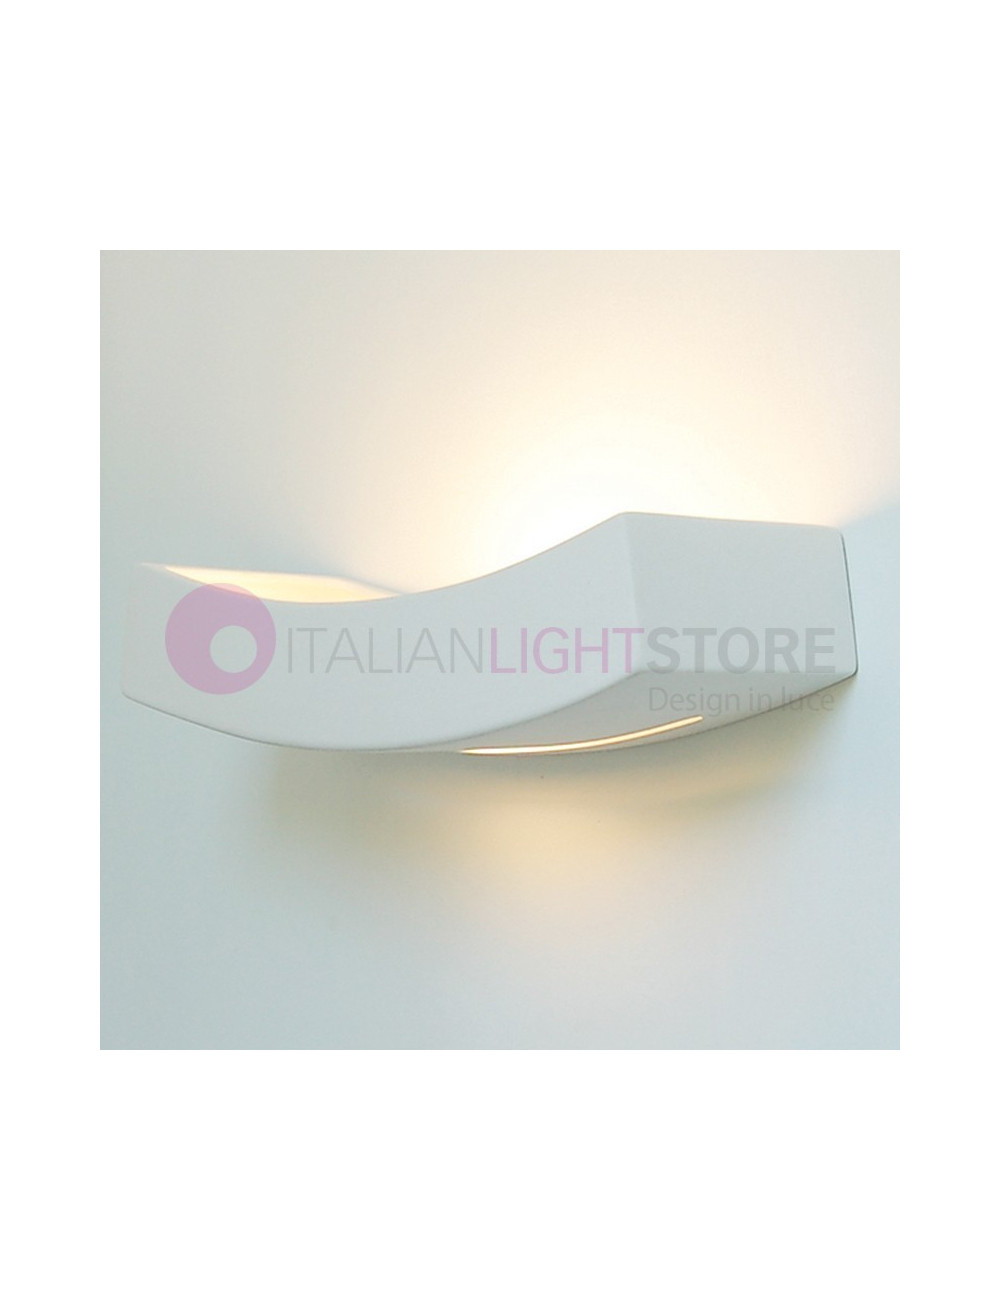 wall lamp modern curved plaster colorable